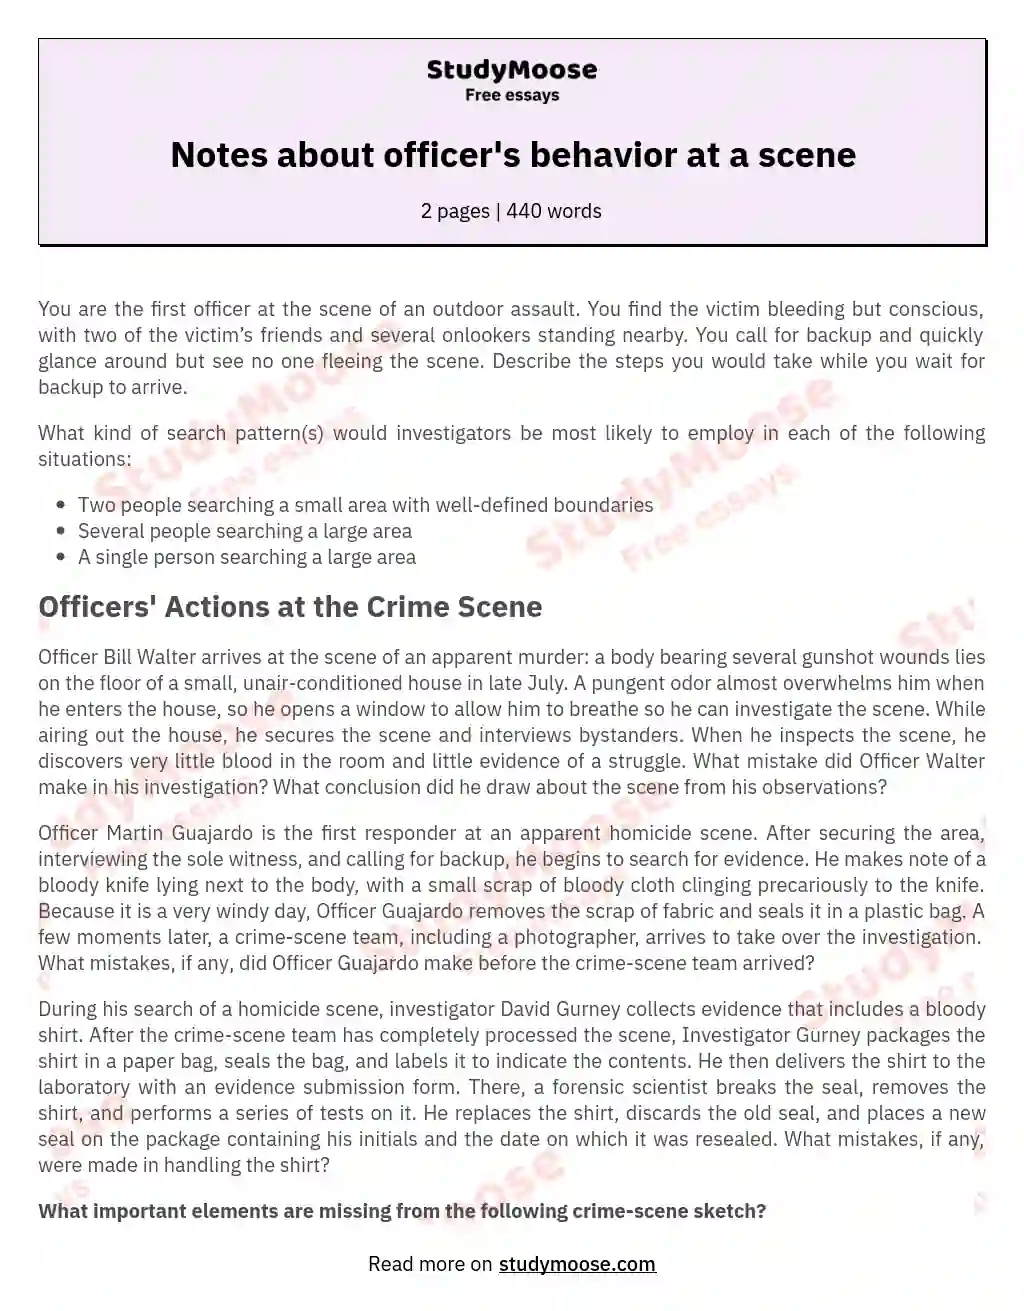 Notes about officer's behavior at a scene essay